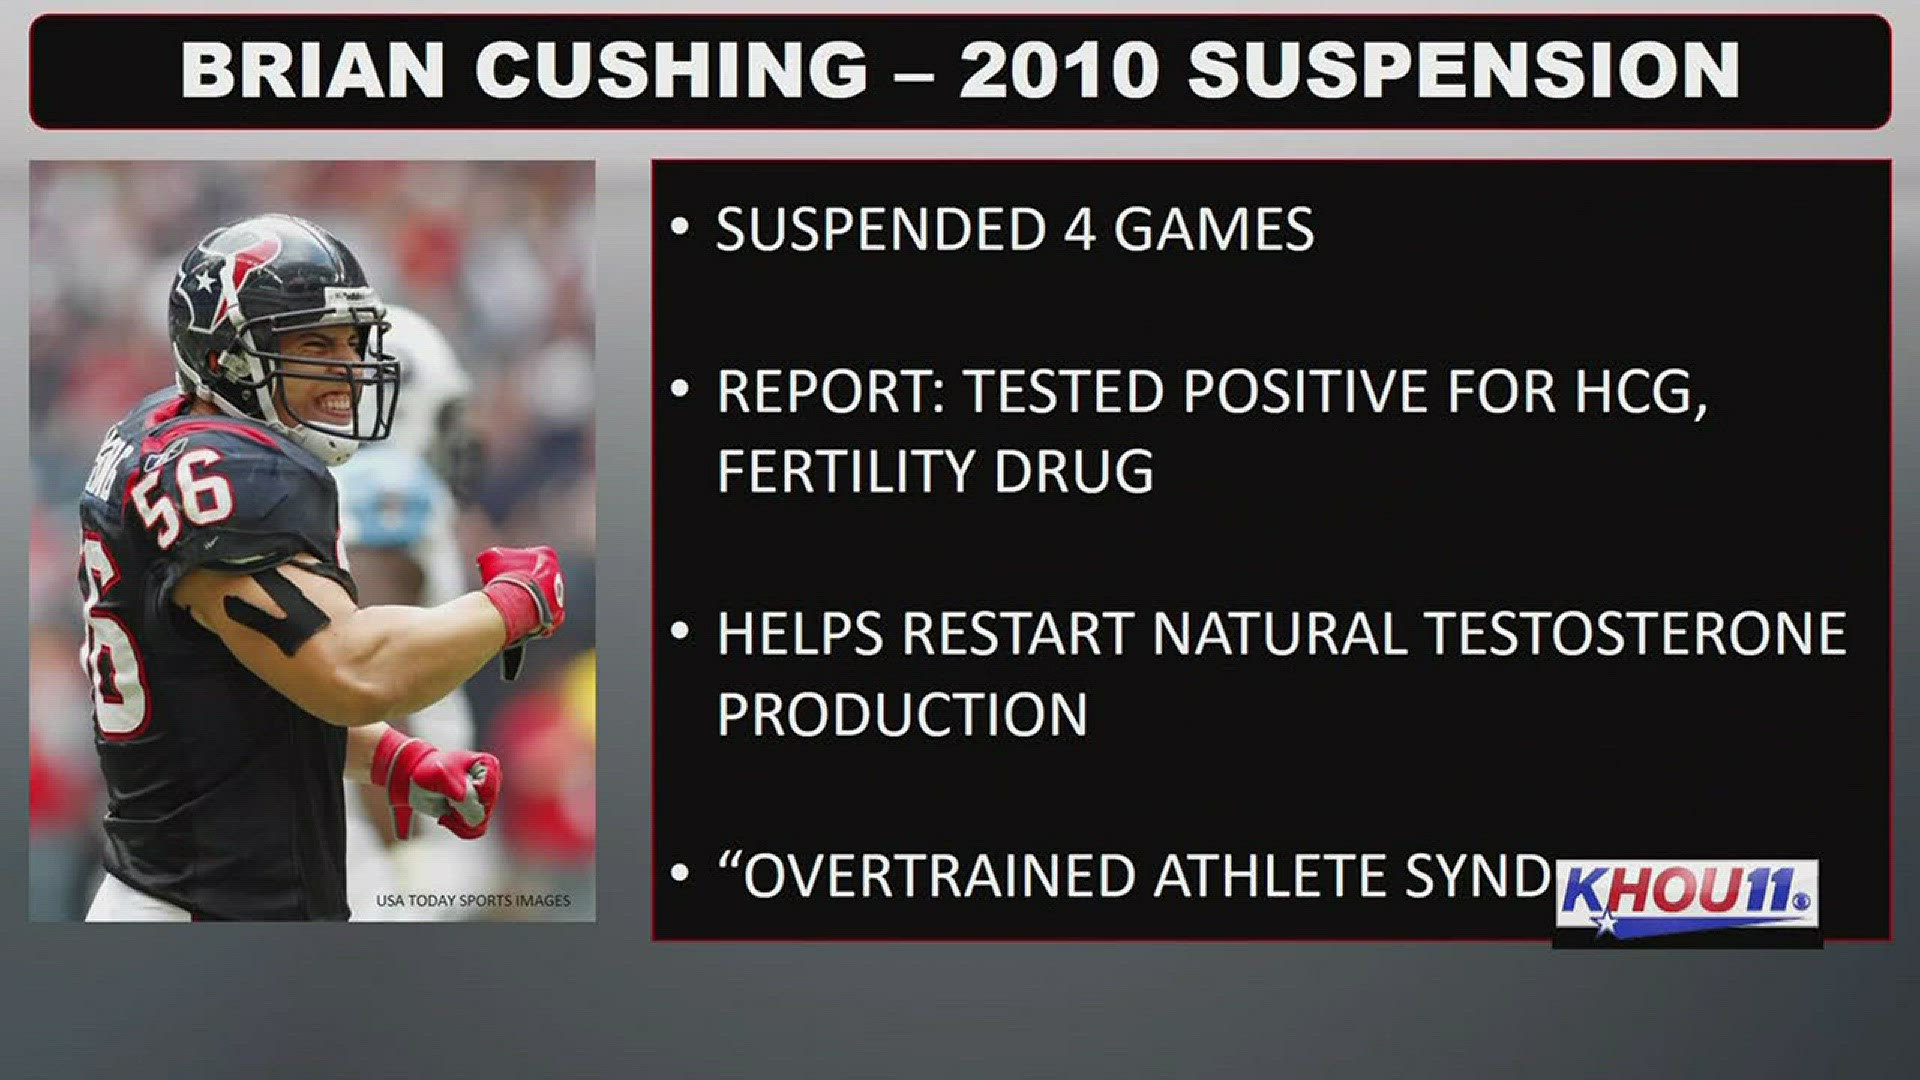 Texans linebacker Brian Cushing was slapped with a 10-game suspension for violating the NFL's policy on performance enhancing substances.